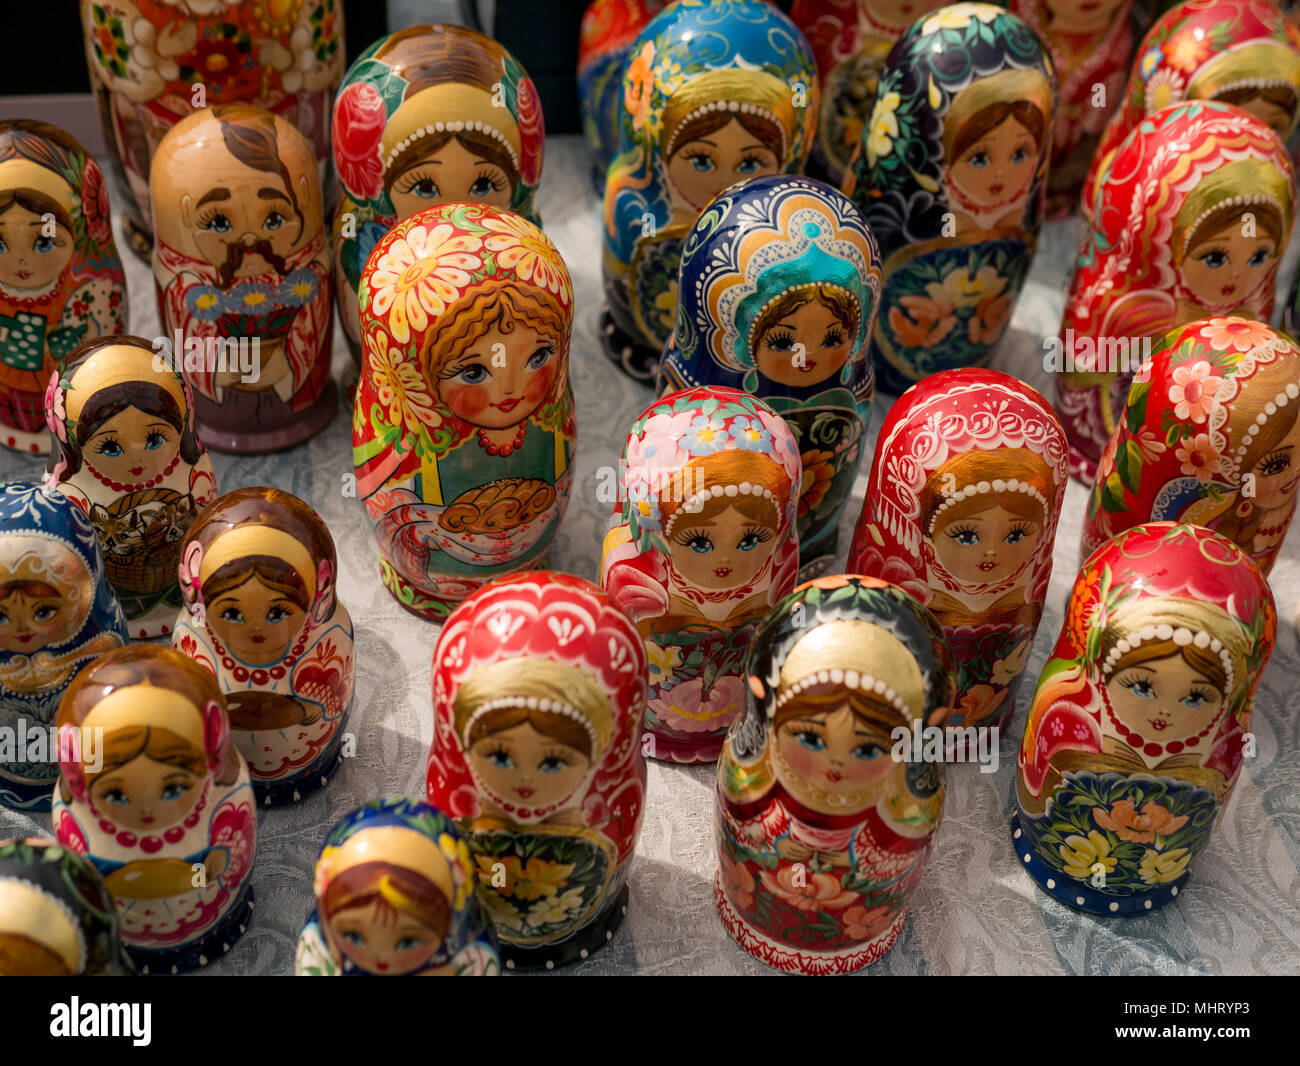 Matrioshka at the street market, iconic popular souvenir from Russia, Ukraine. Colorful bright russian nesting dolls. National traditions Consept Stock Photo